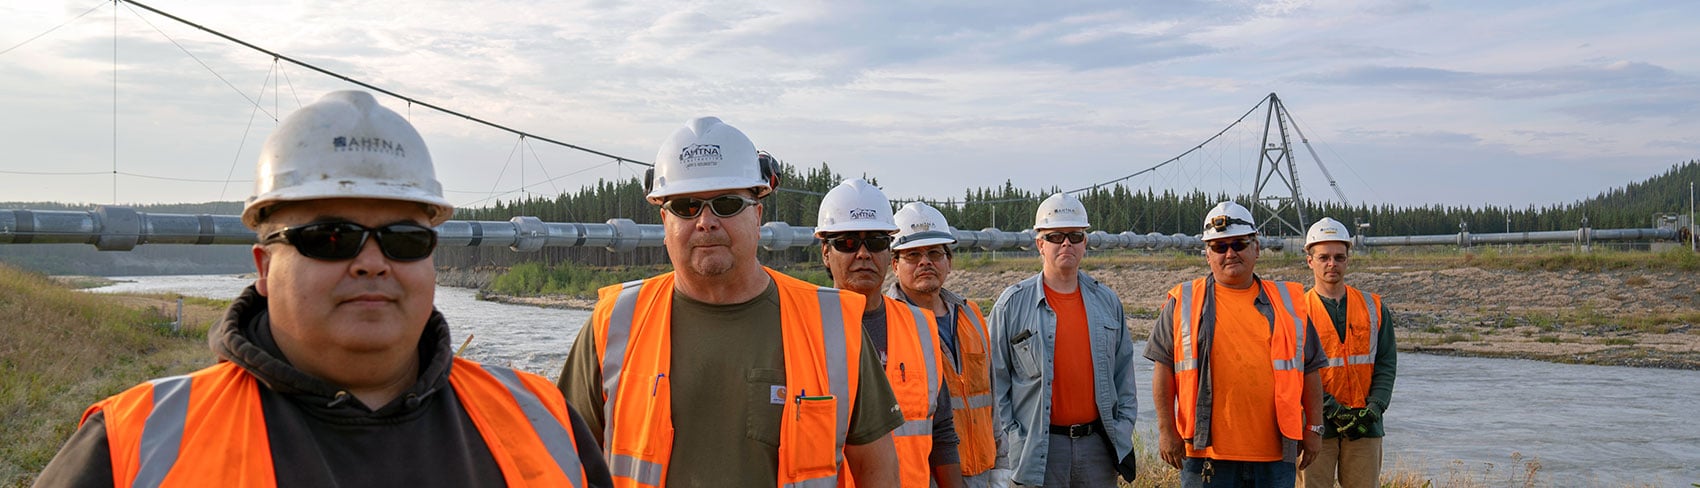 7 men in the Alaska wild working in Ahtna hardhats and safety vests. A river with the trans Alaska pipeline behind them.